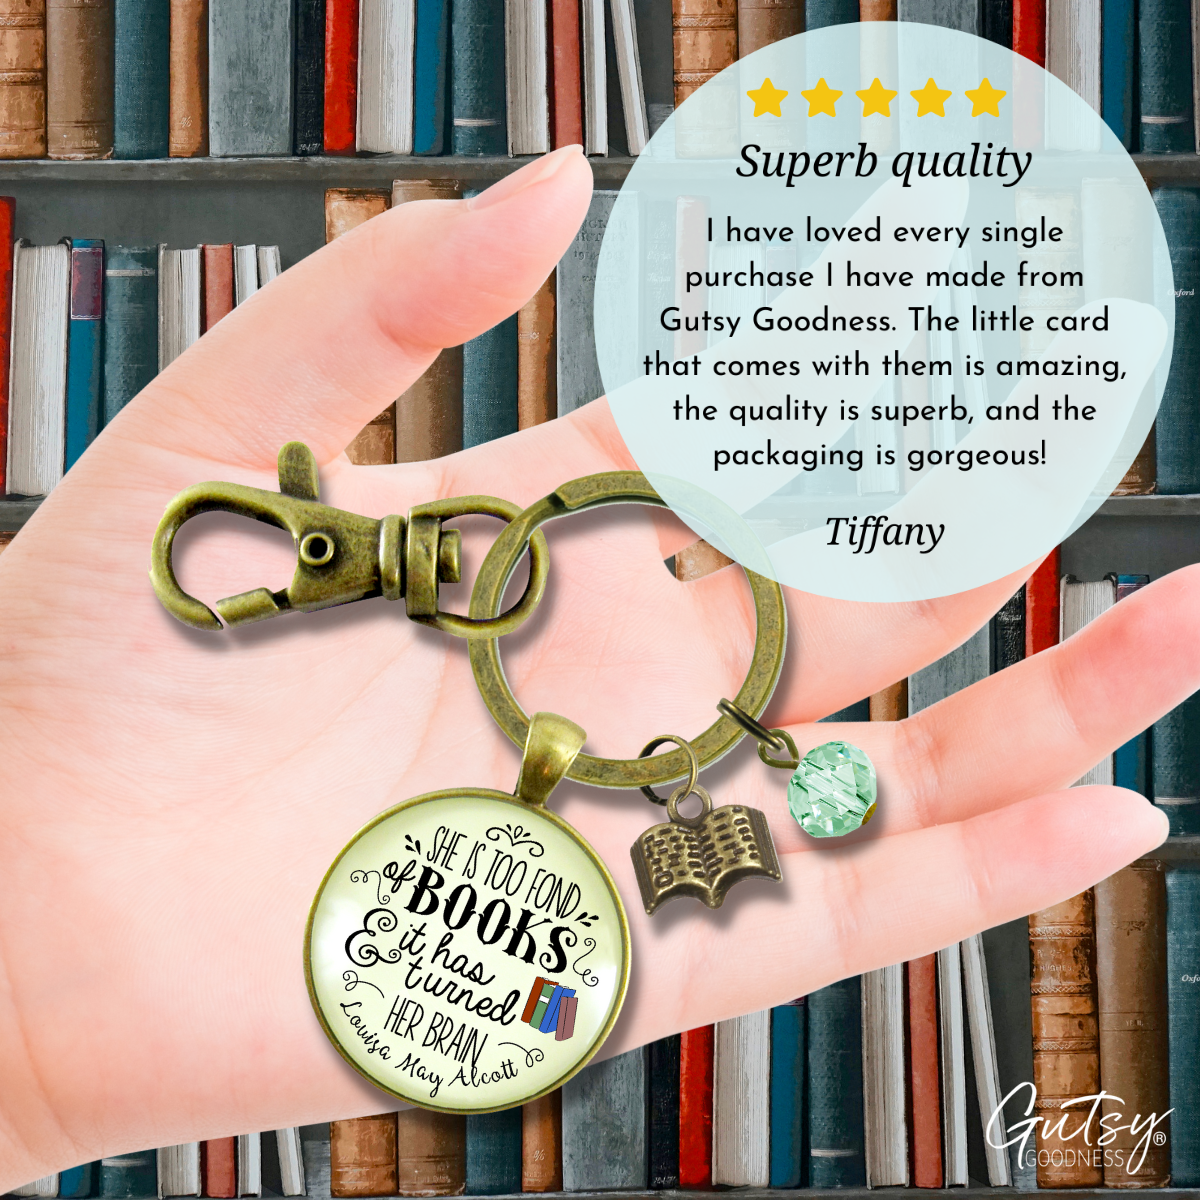 Book Keychain She Is Too Fond Literary Quote Louisa May Alcott Reader Inspired Jewelry Green - Gutsy Goodness;Book Keychain She Is Too Fond Literary Quote Louisa May Alcott Reader Inspired Jewelry Green - Gutsy Goodness Handmade Jewelry Gifts